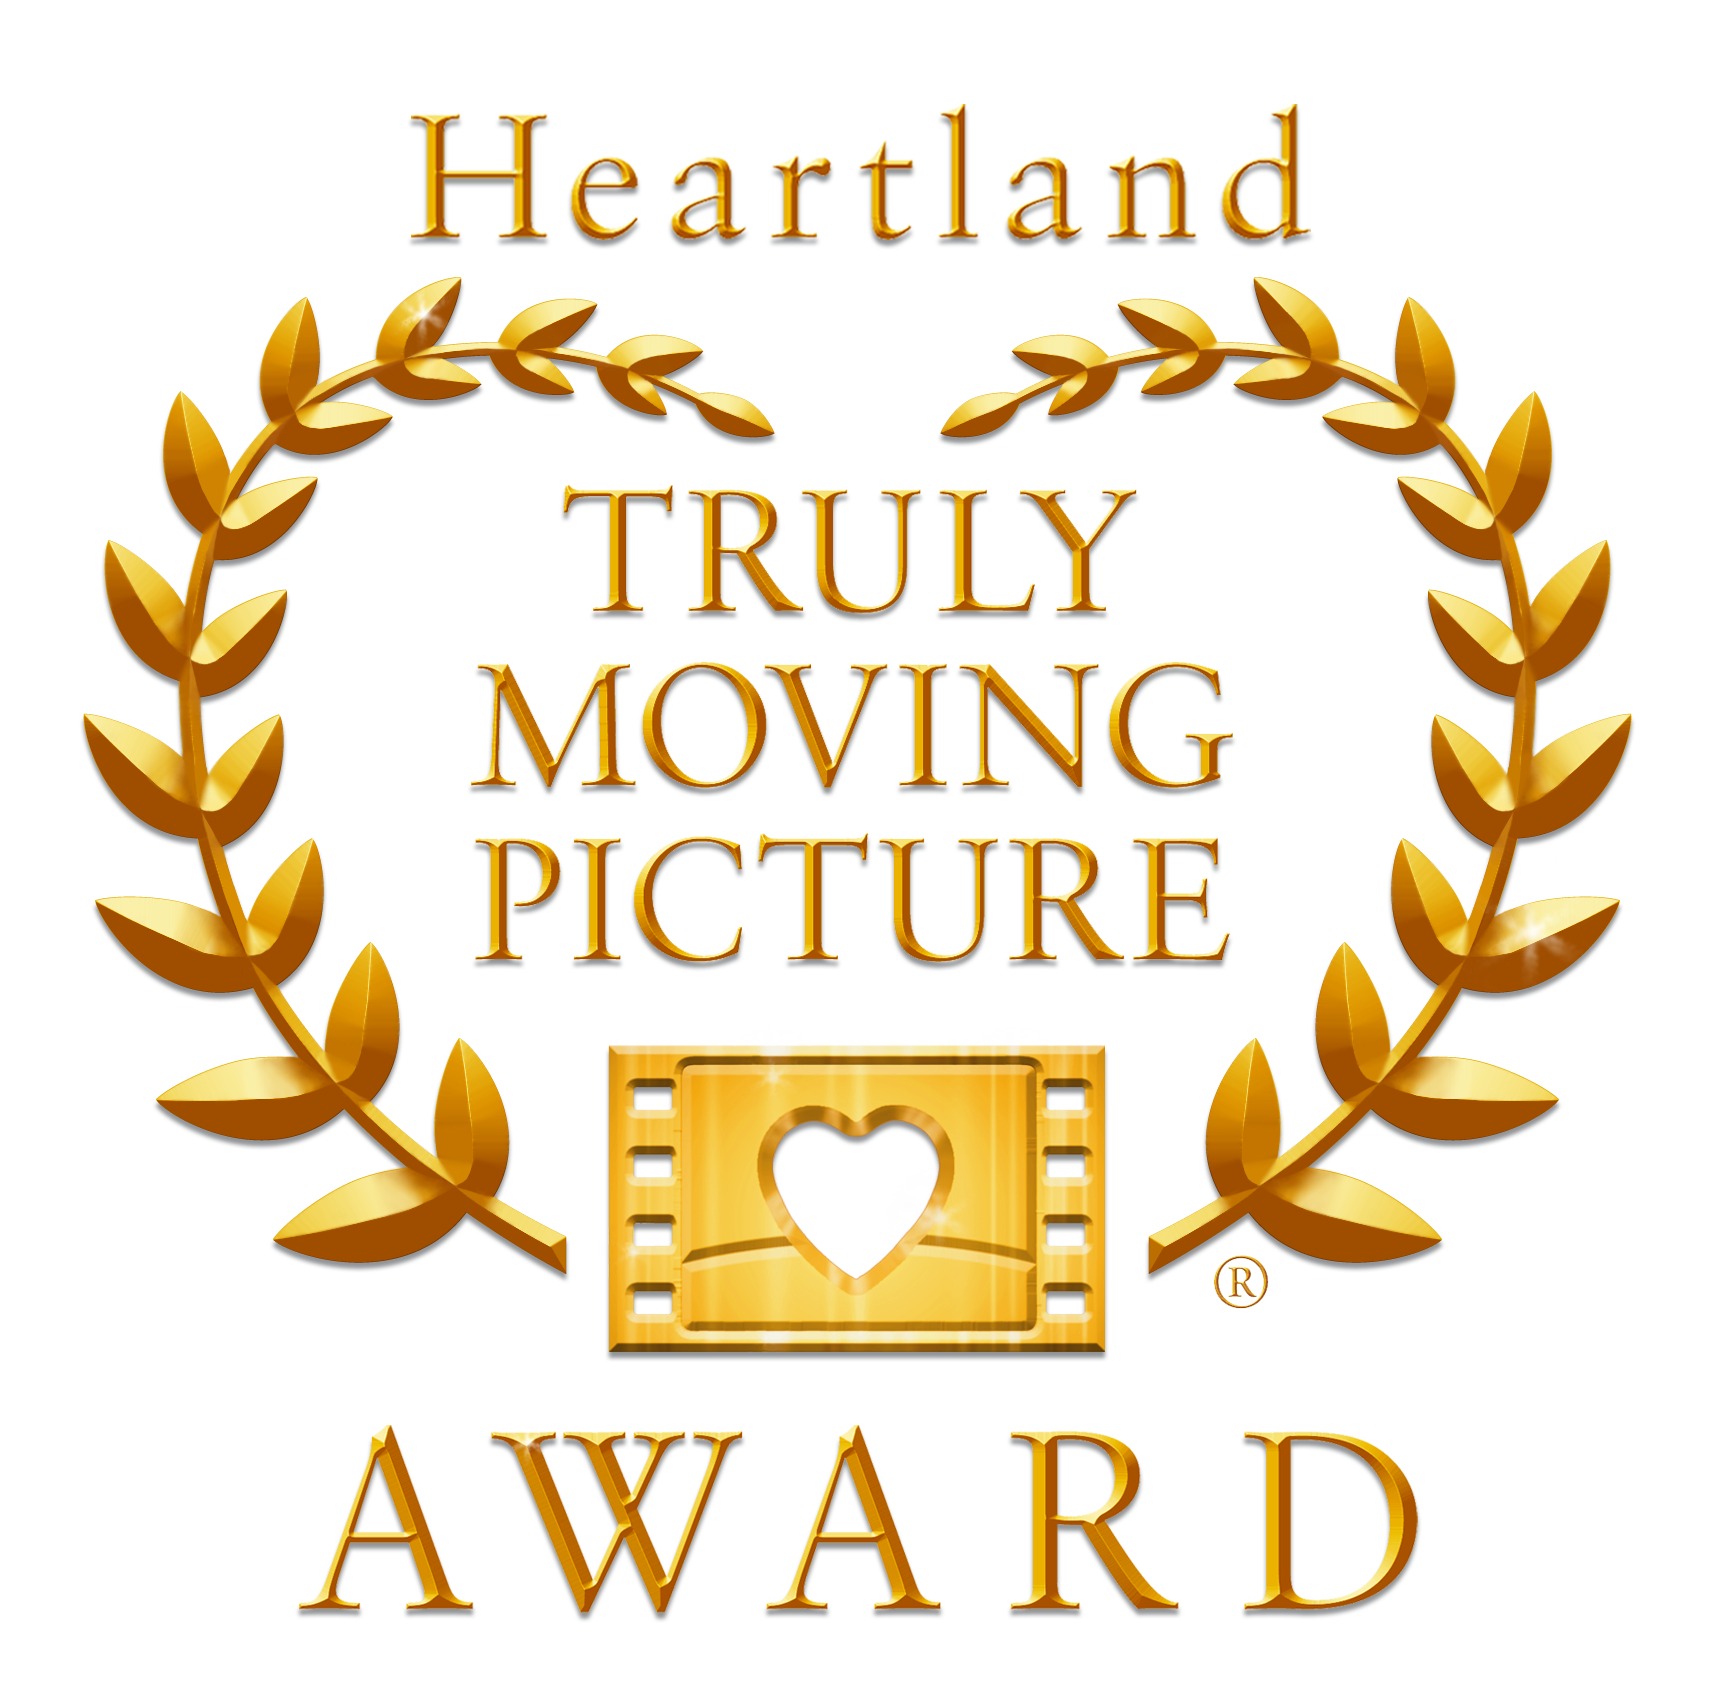 Heartland Announces Top 10 Truly Moving Picture Award Winners of 2013